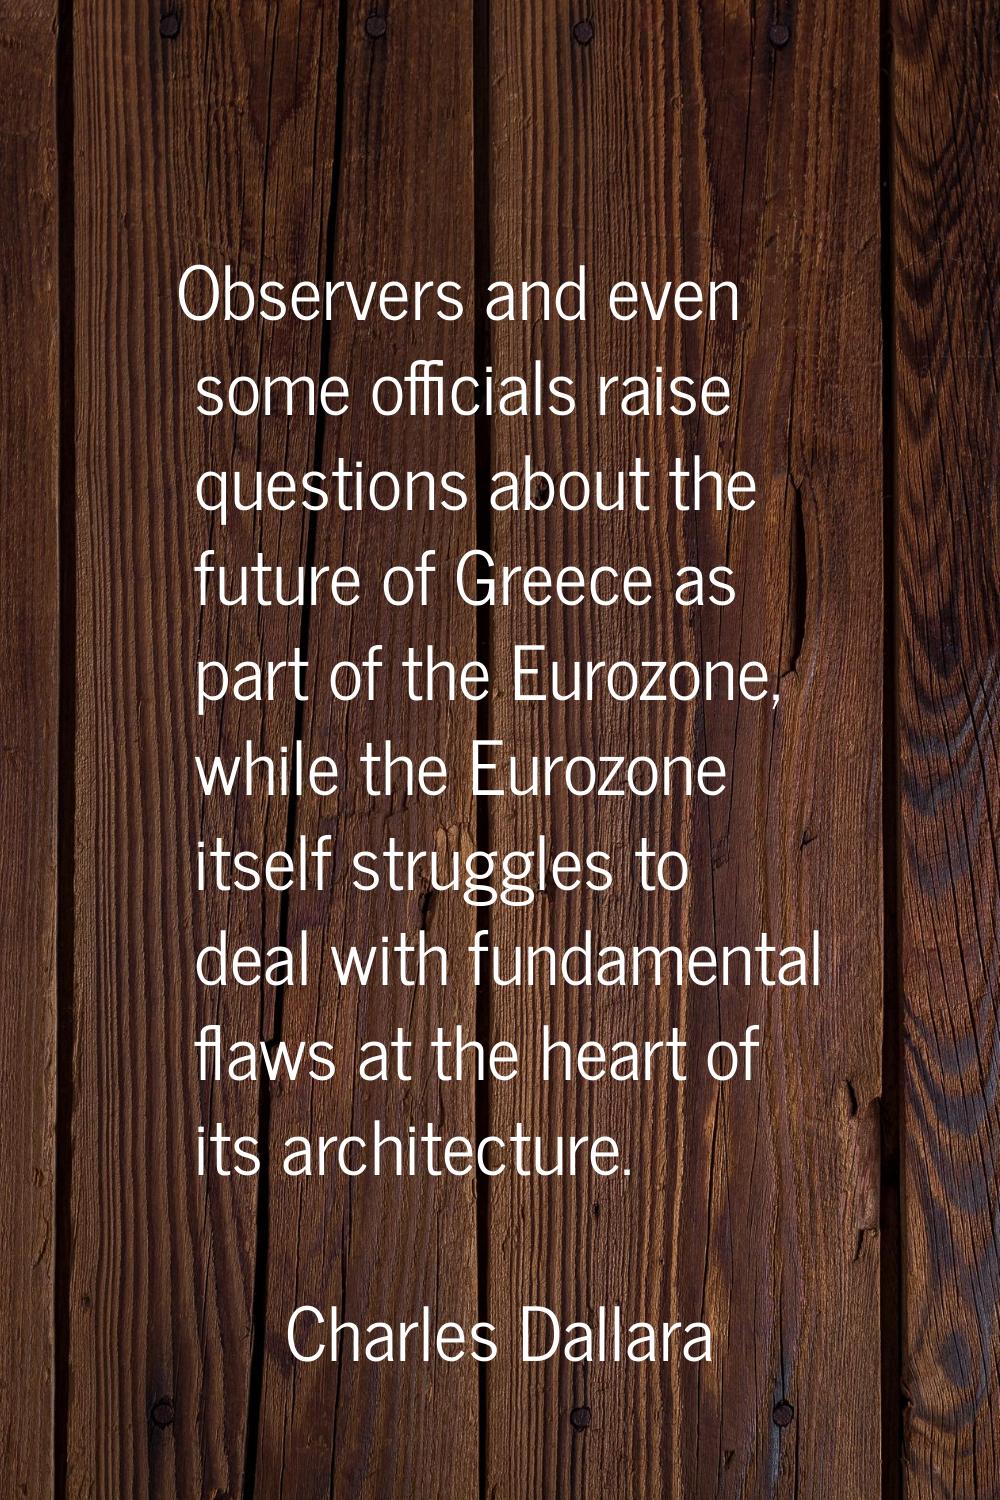 Observers and even some officials raise questions about the future of Greece as part of the Eurozon